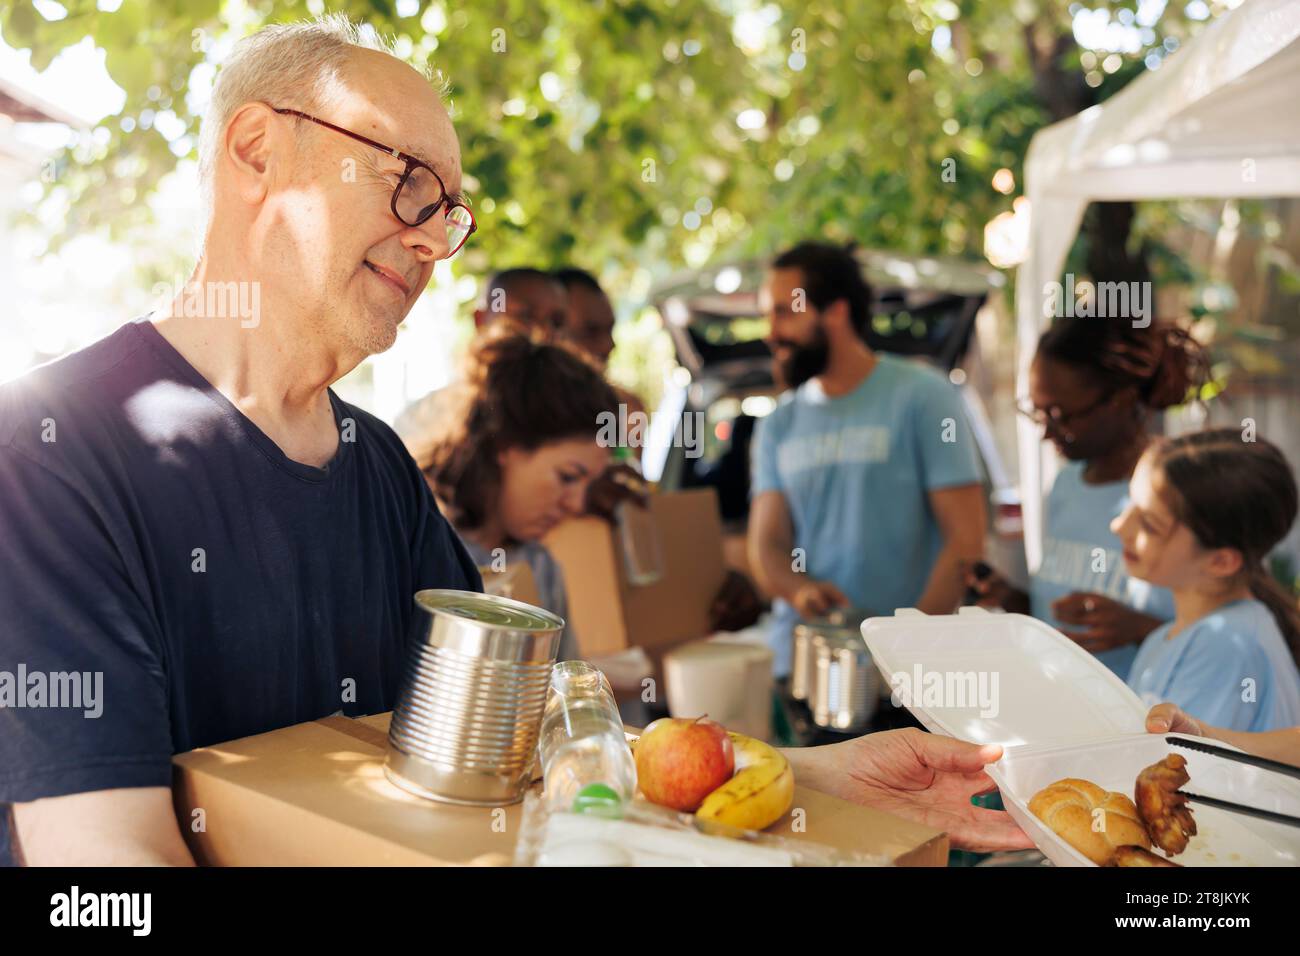 Detailed image of poor, needy caucasian man receiving meal box and canned goods from non-profit food drive. Close-up of low priviliged male individual getting free food from volunteers. Stock Photo